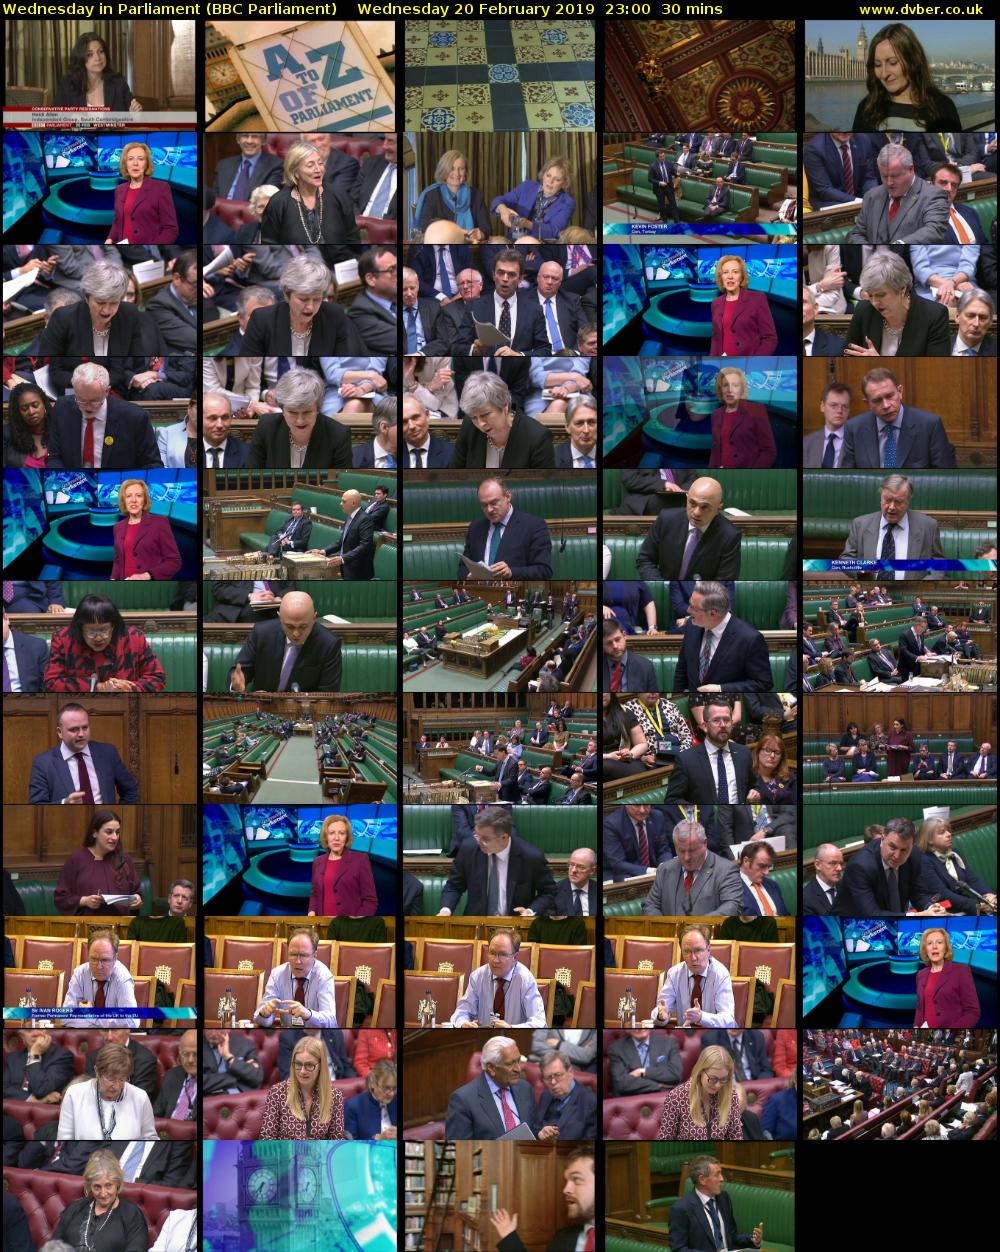 Wednesday in Parliament (BBC Parliament) Wednesday 20 February 2019 23:00 - 23:30